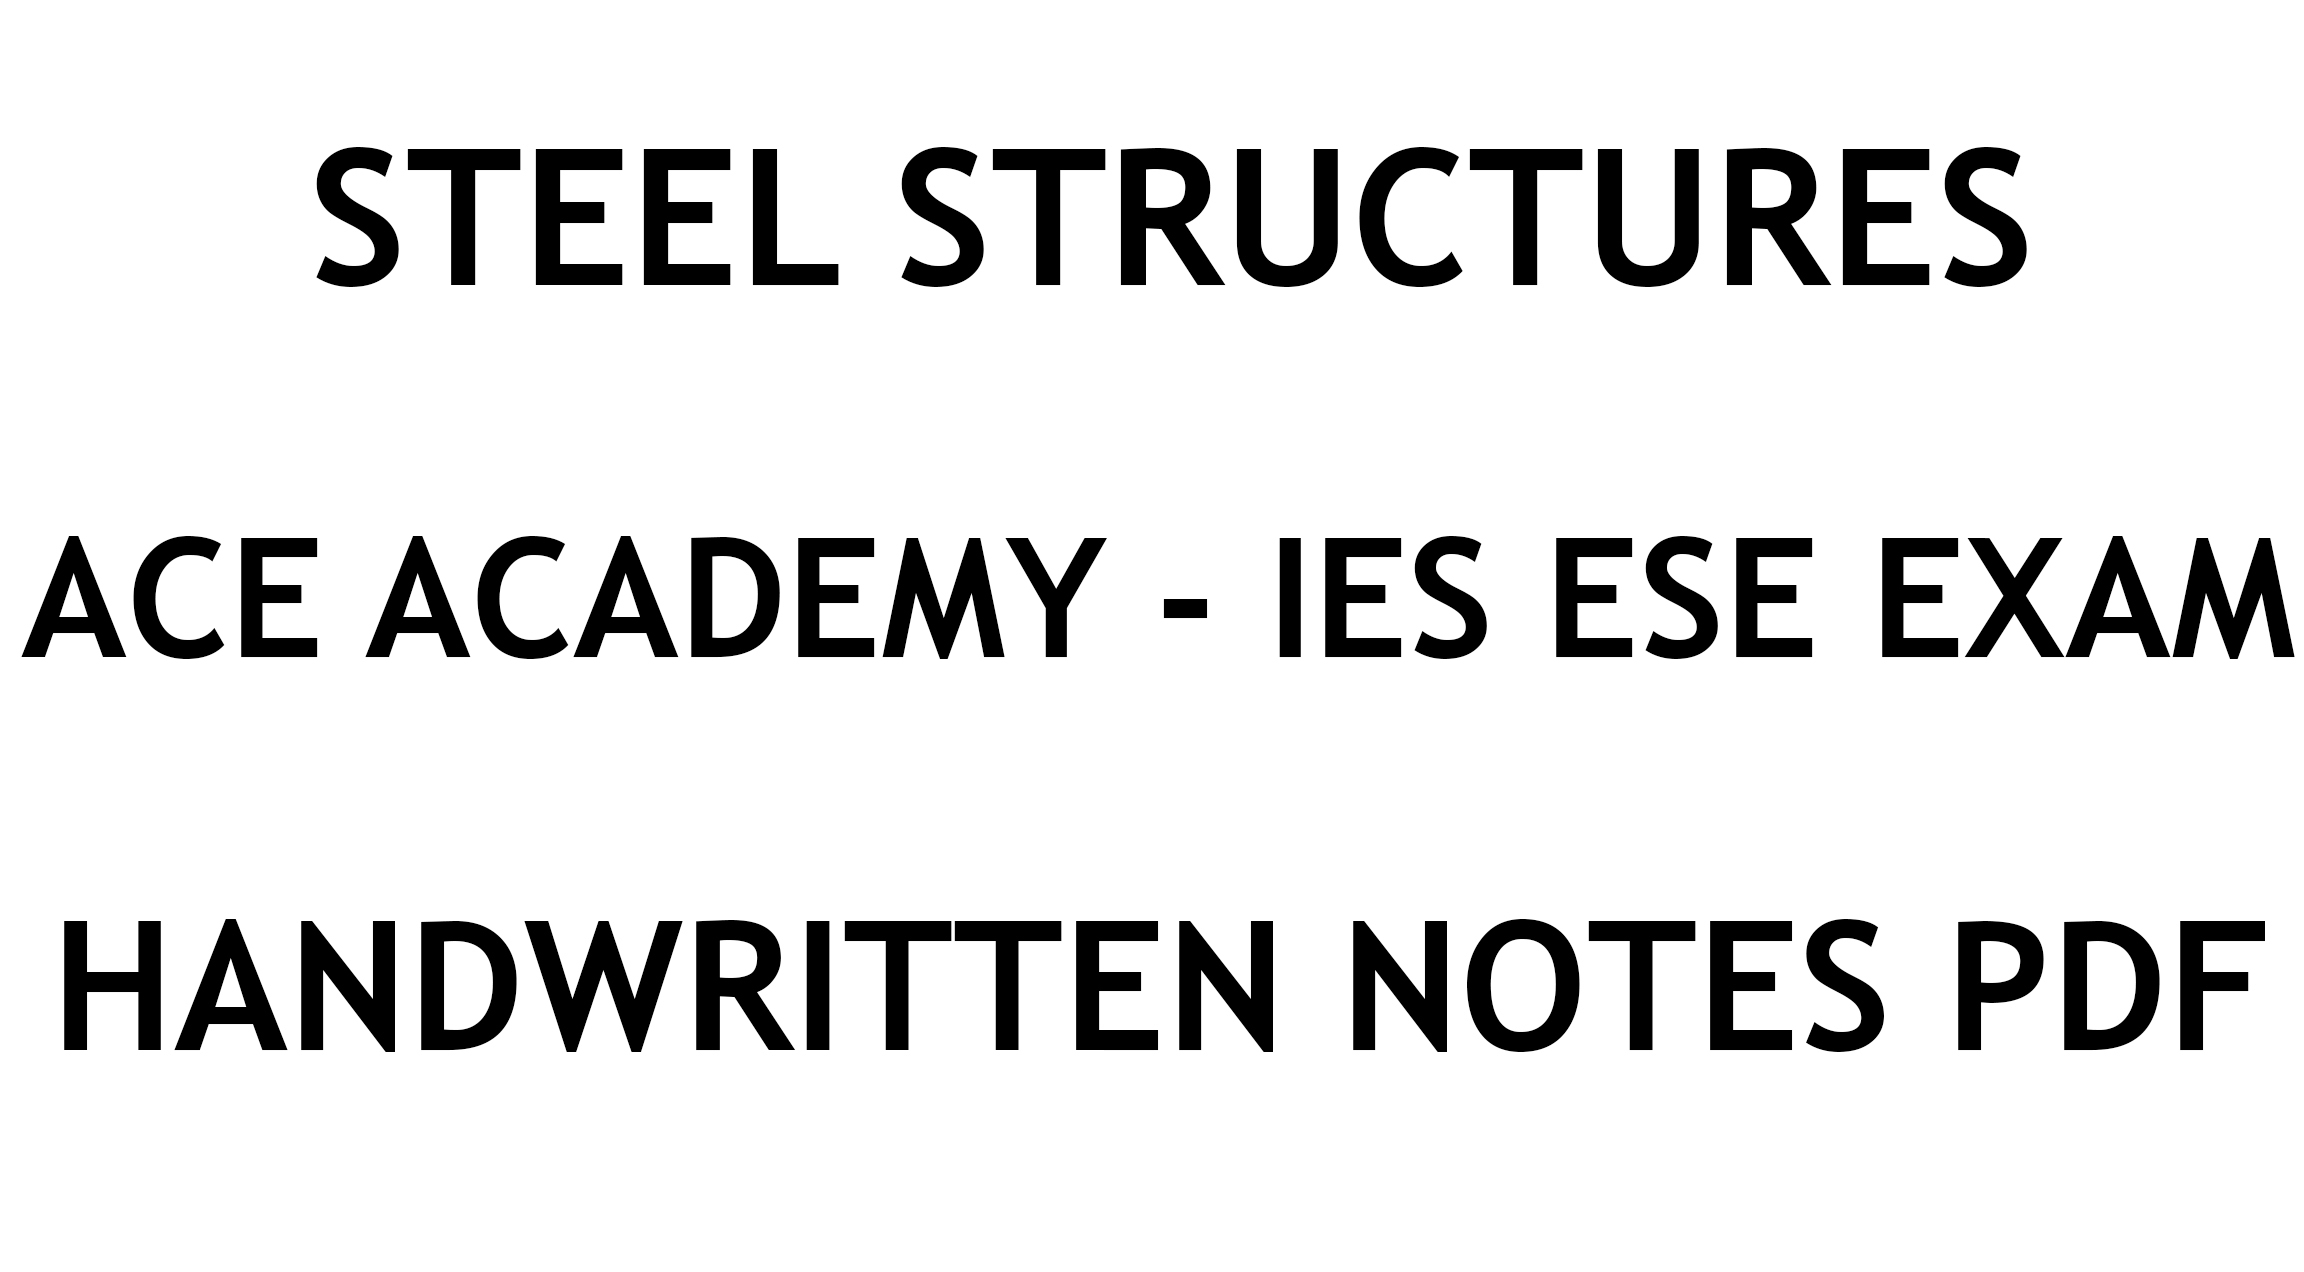 Steel Structures IES ESE Ace Academy Handwritten Notes PDF